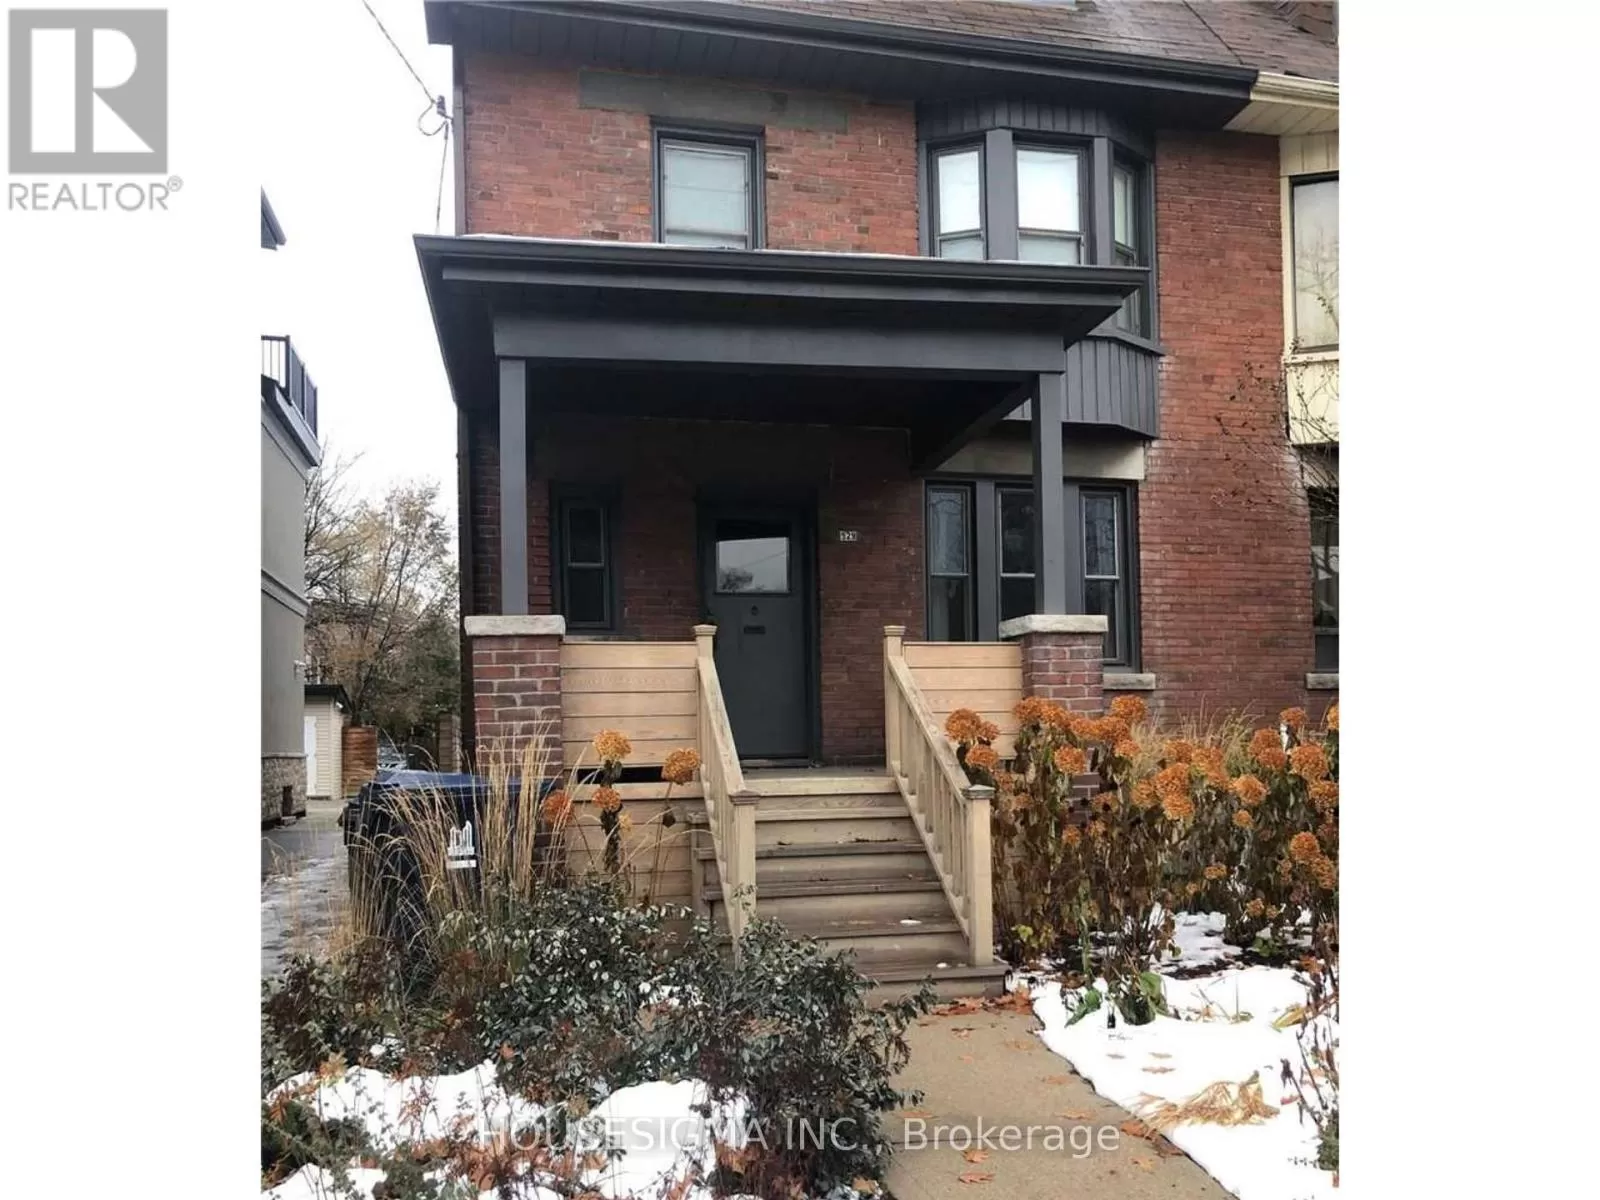 House for rent: Bsmt - 529 Runnymede Road, Toronto, Ontario M6S 2Z8